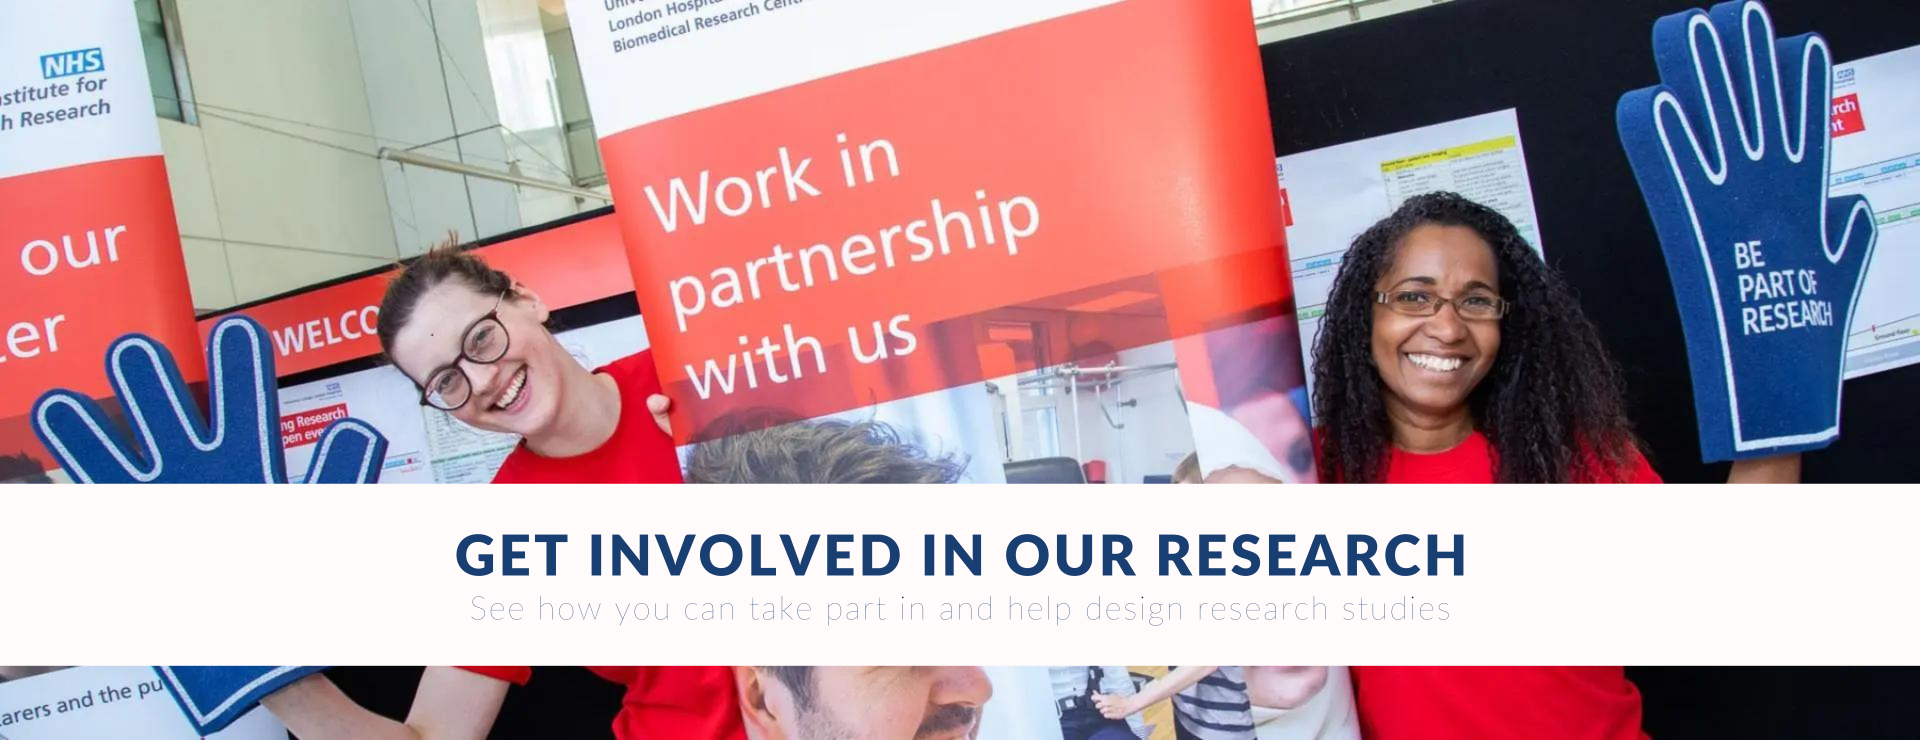 Get involved research banner 